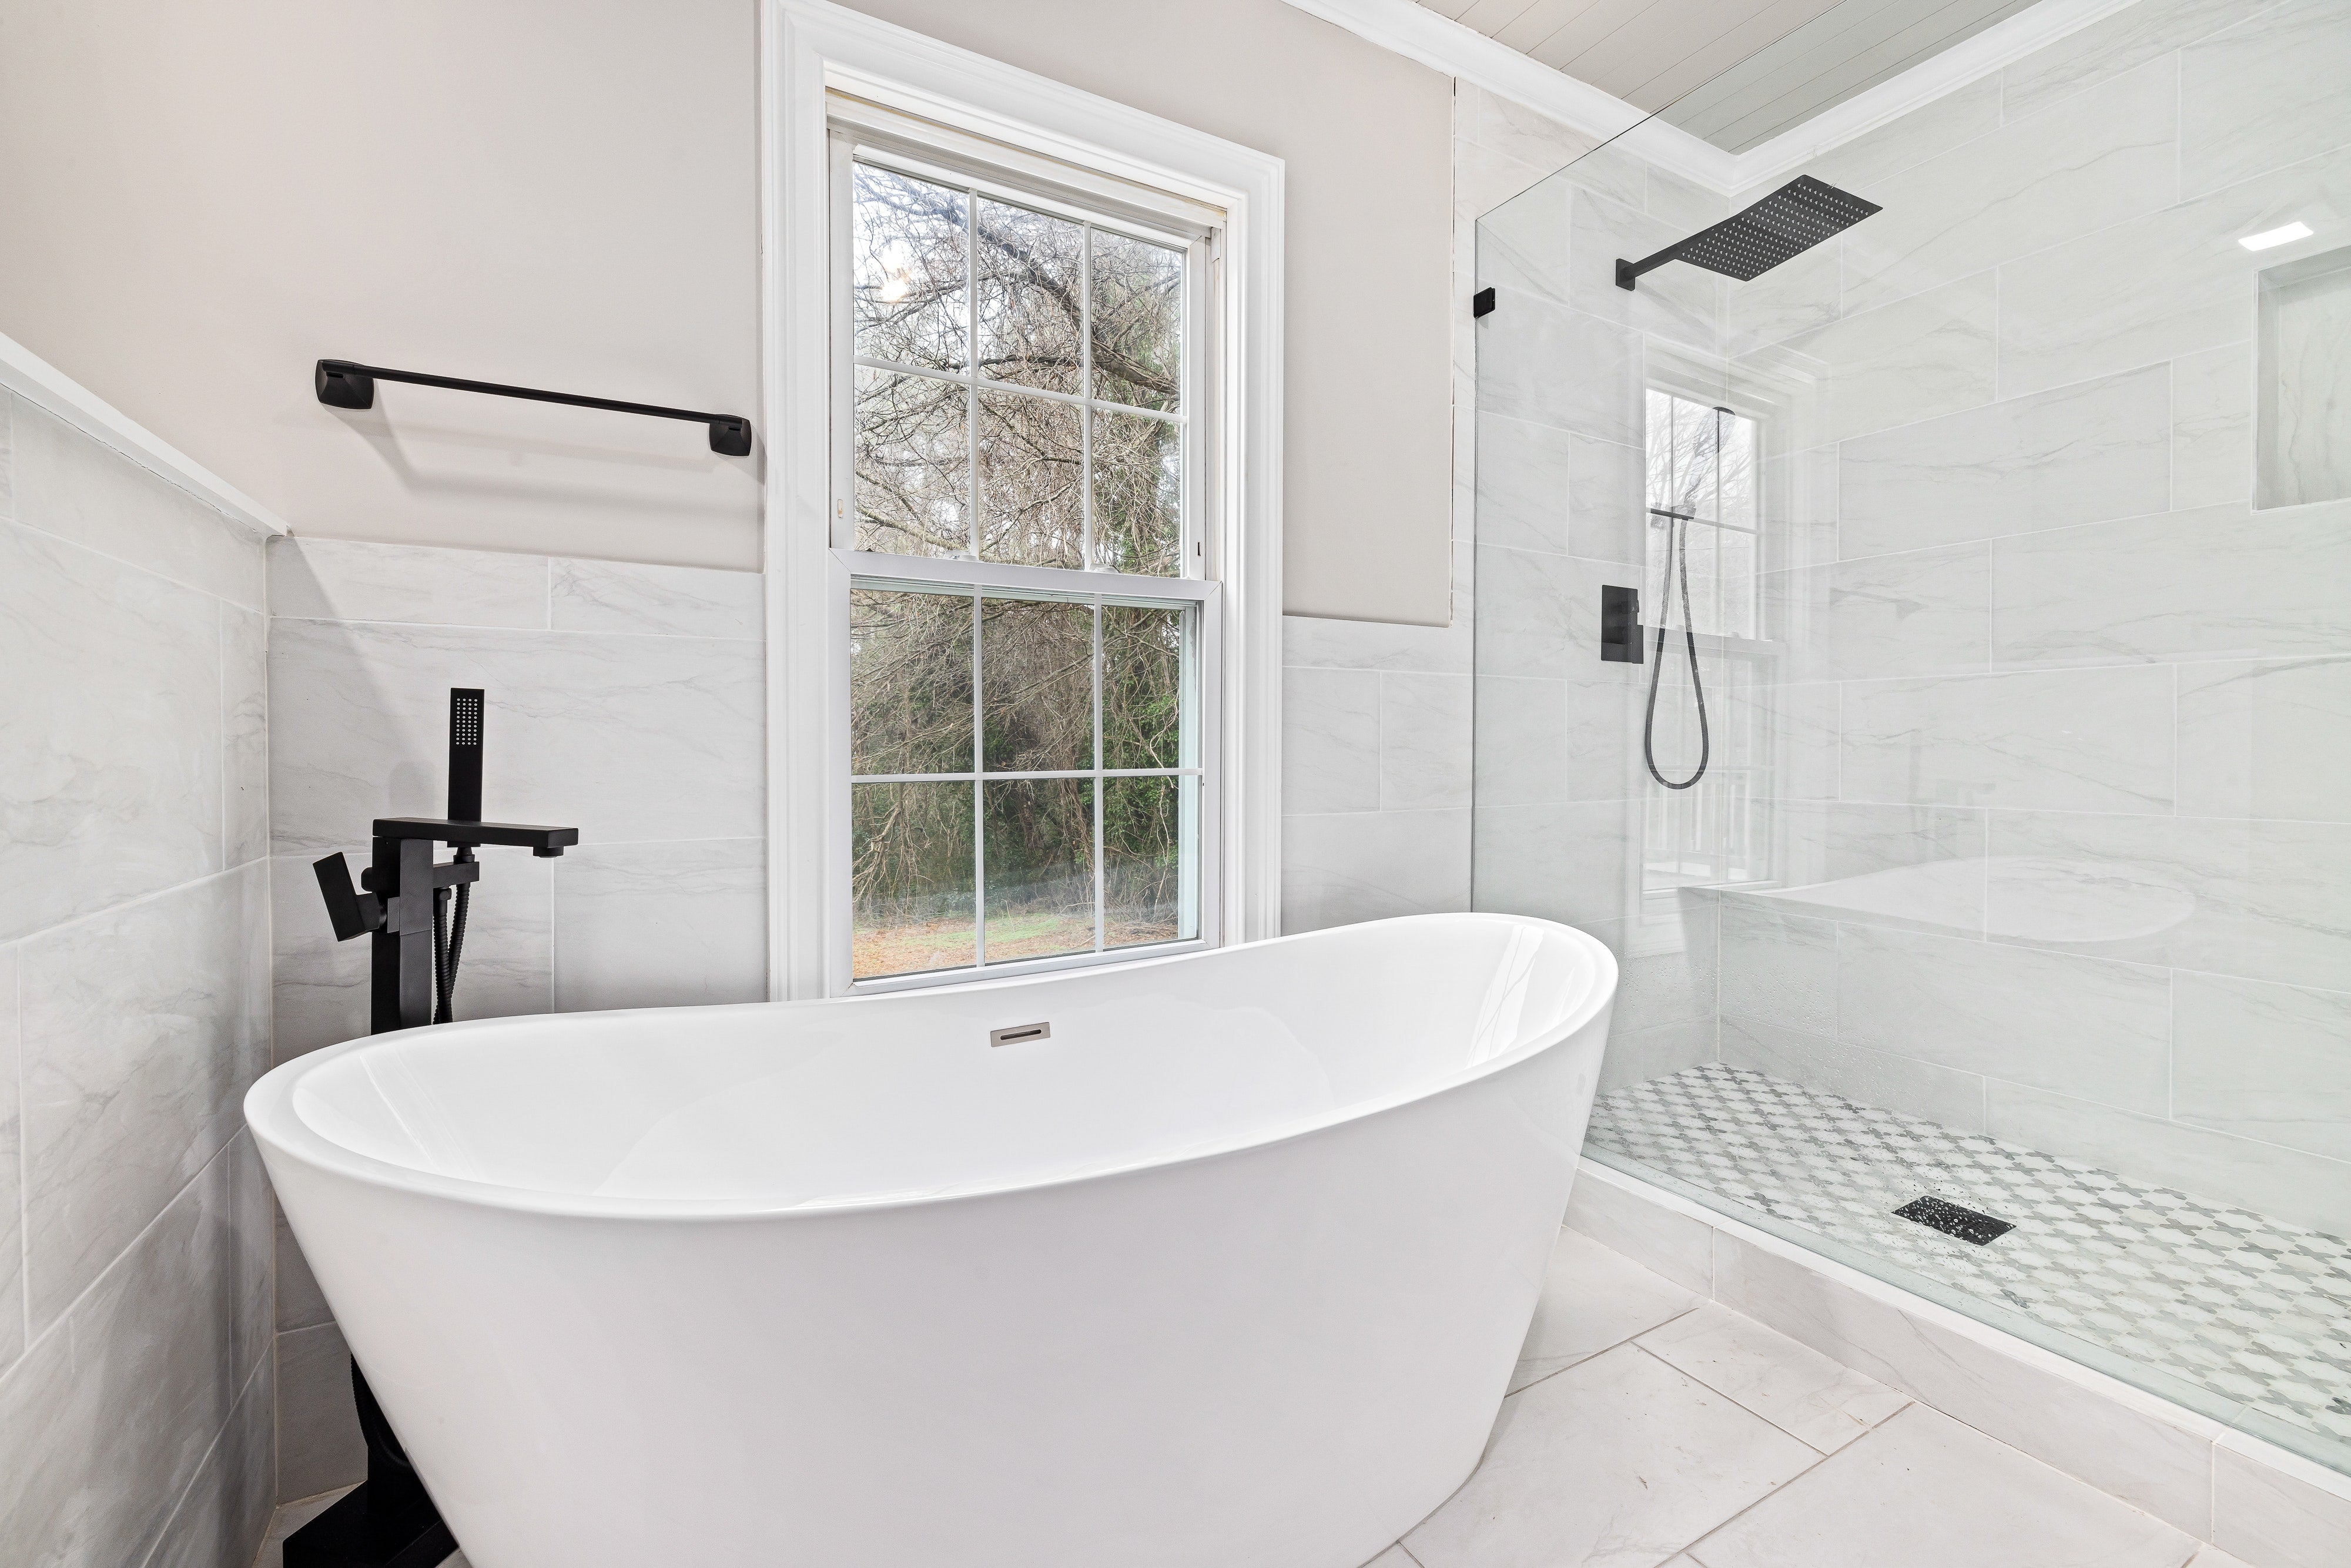 Features to Consider When Choosing Your Perfect Freestanding Tub